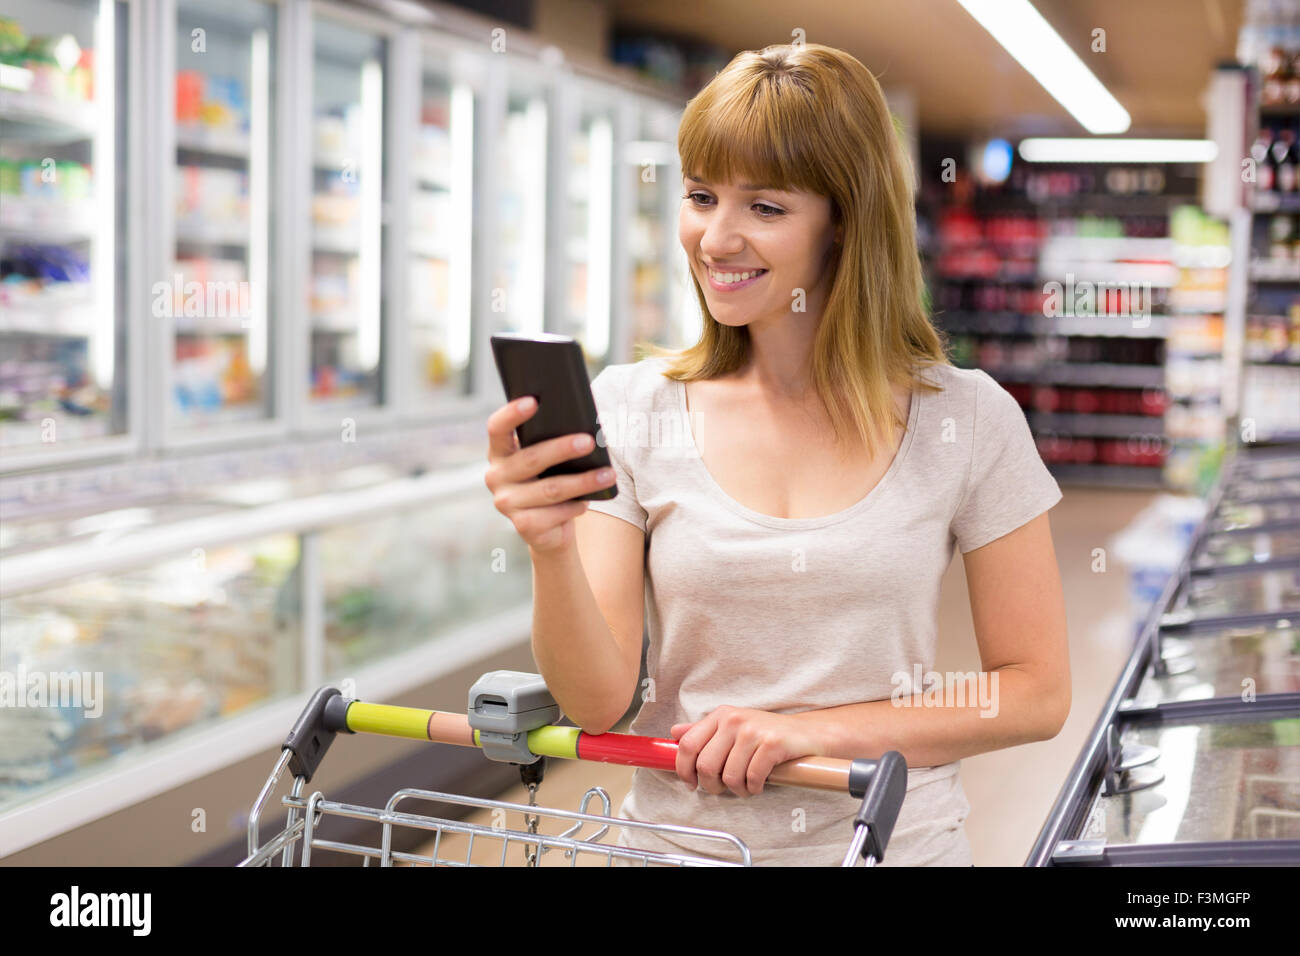 Cute young woman texting on her cell phone in supermarket. Stock Photo